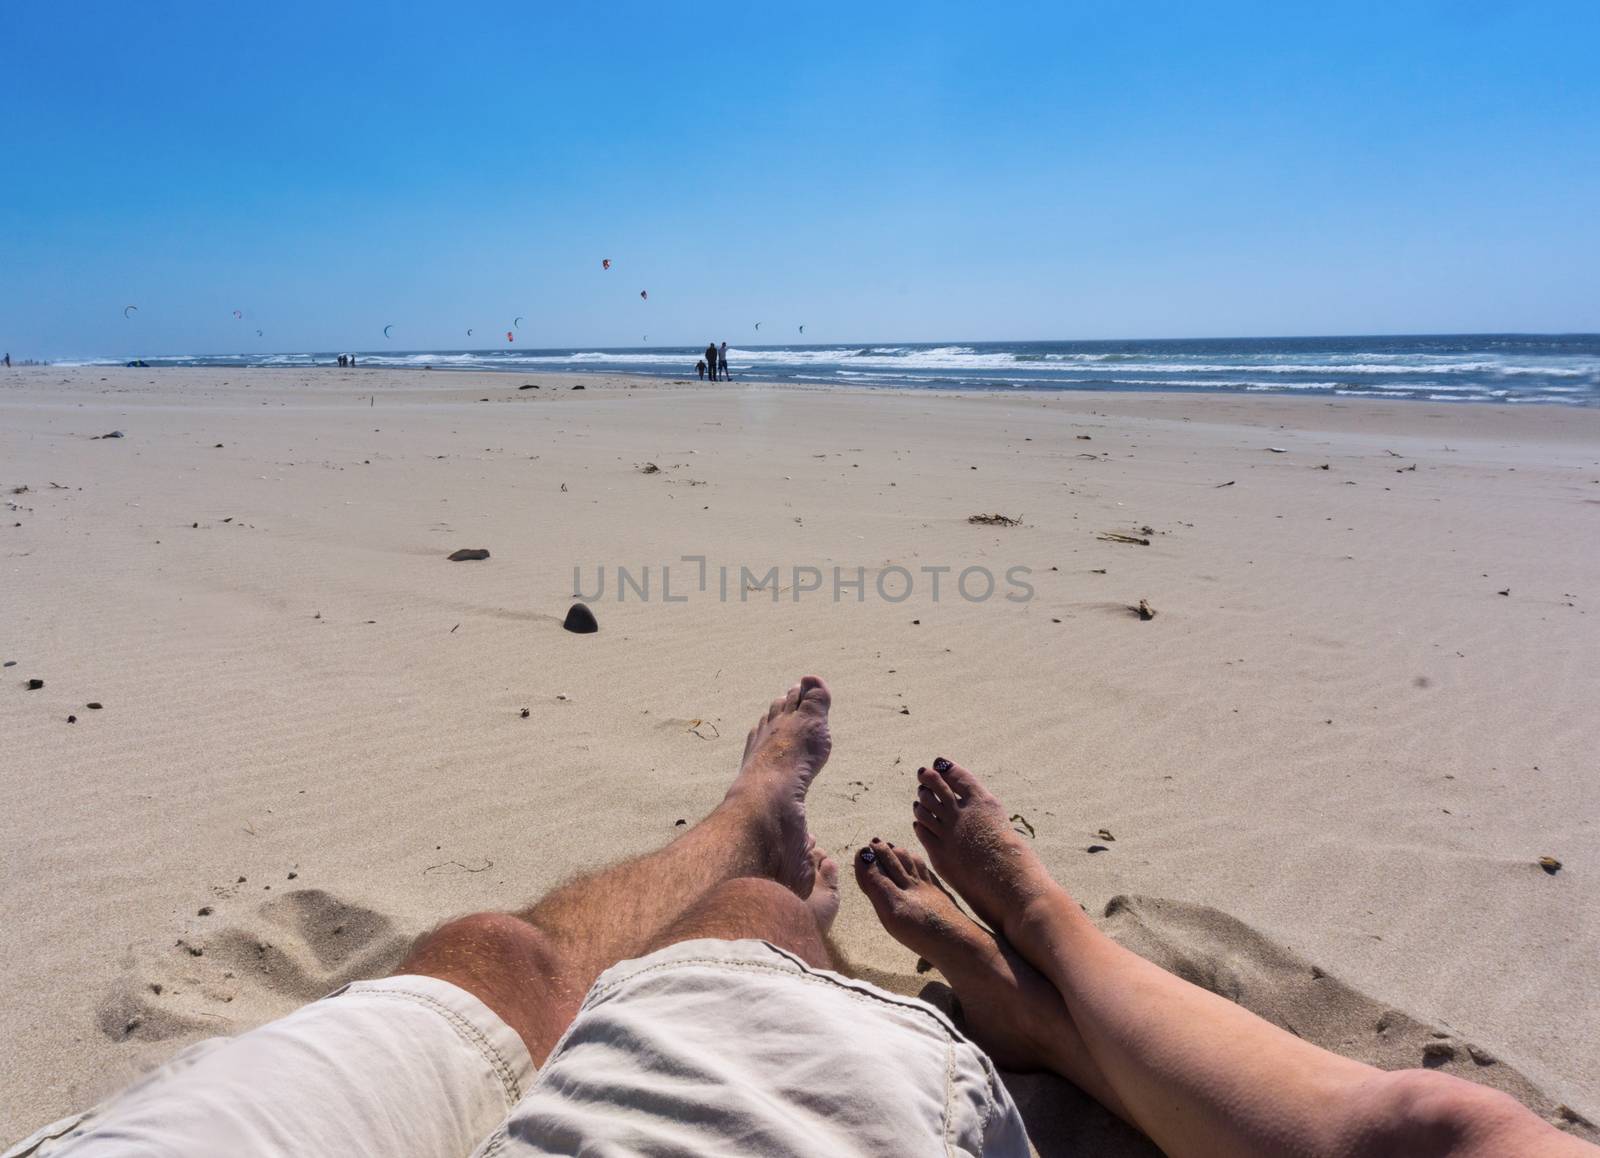 Two people relaxing on the beach with their feet in the sand watching wind surfers.